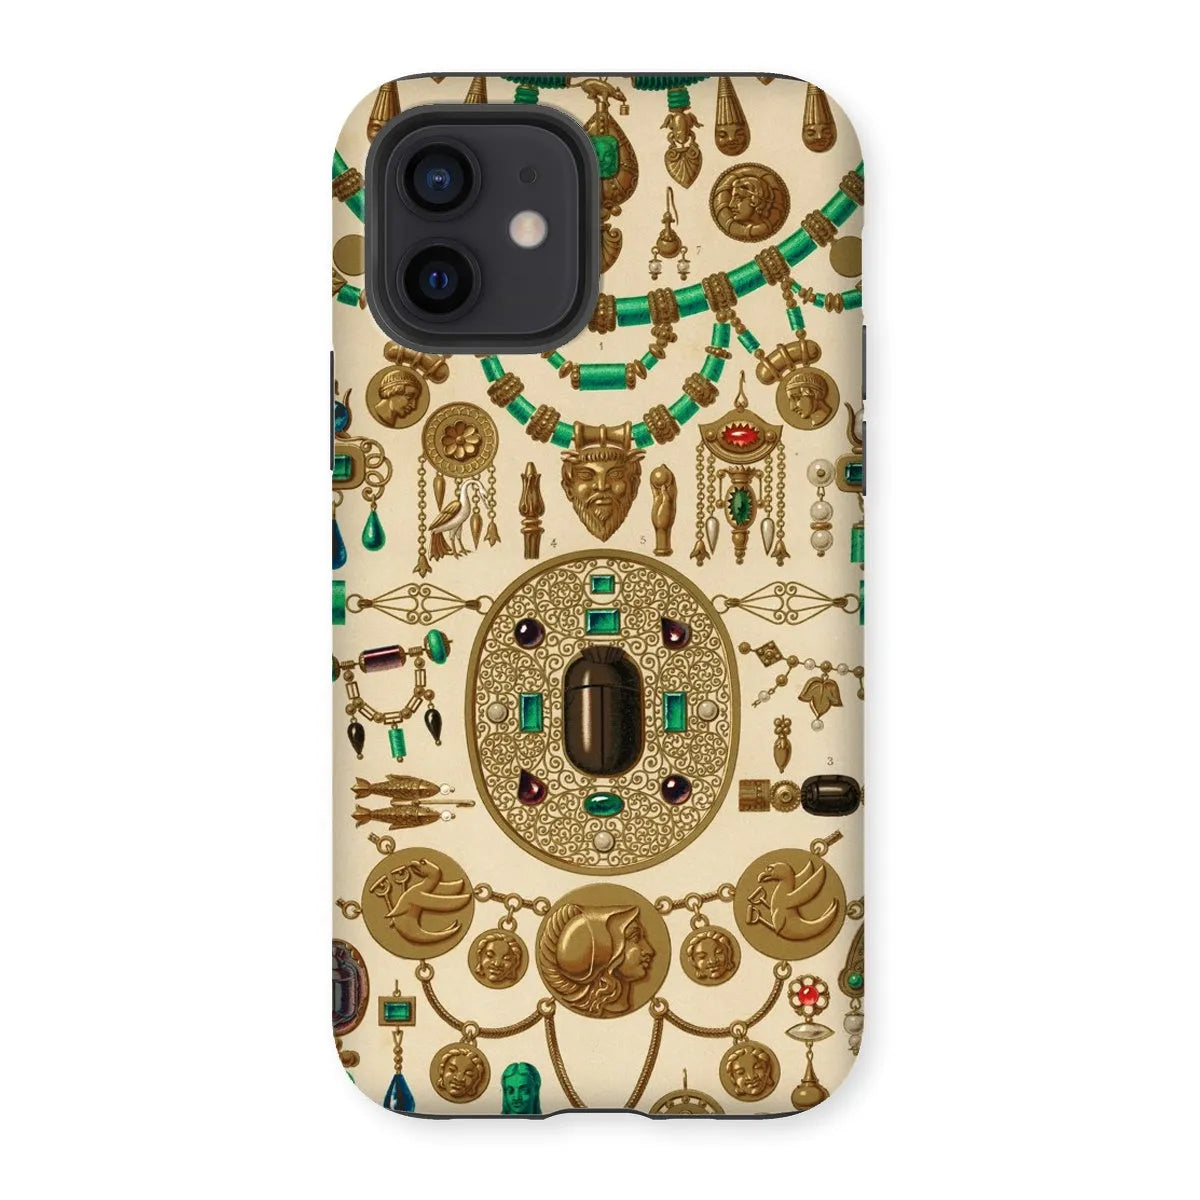 Etruscan Patterns From L’ornement Polychrome By Auguste Racinet Tough Phone Case - Iphone 12 / Matte - Mobile Phone